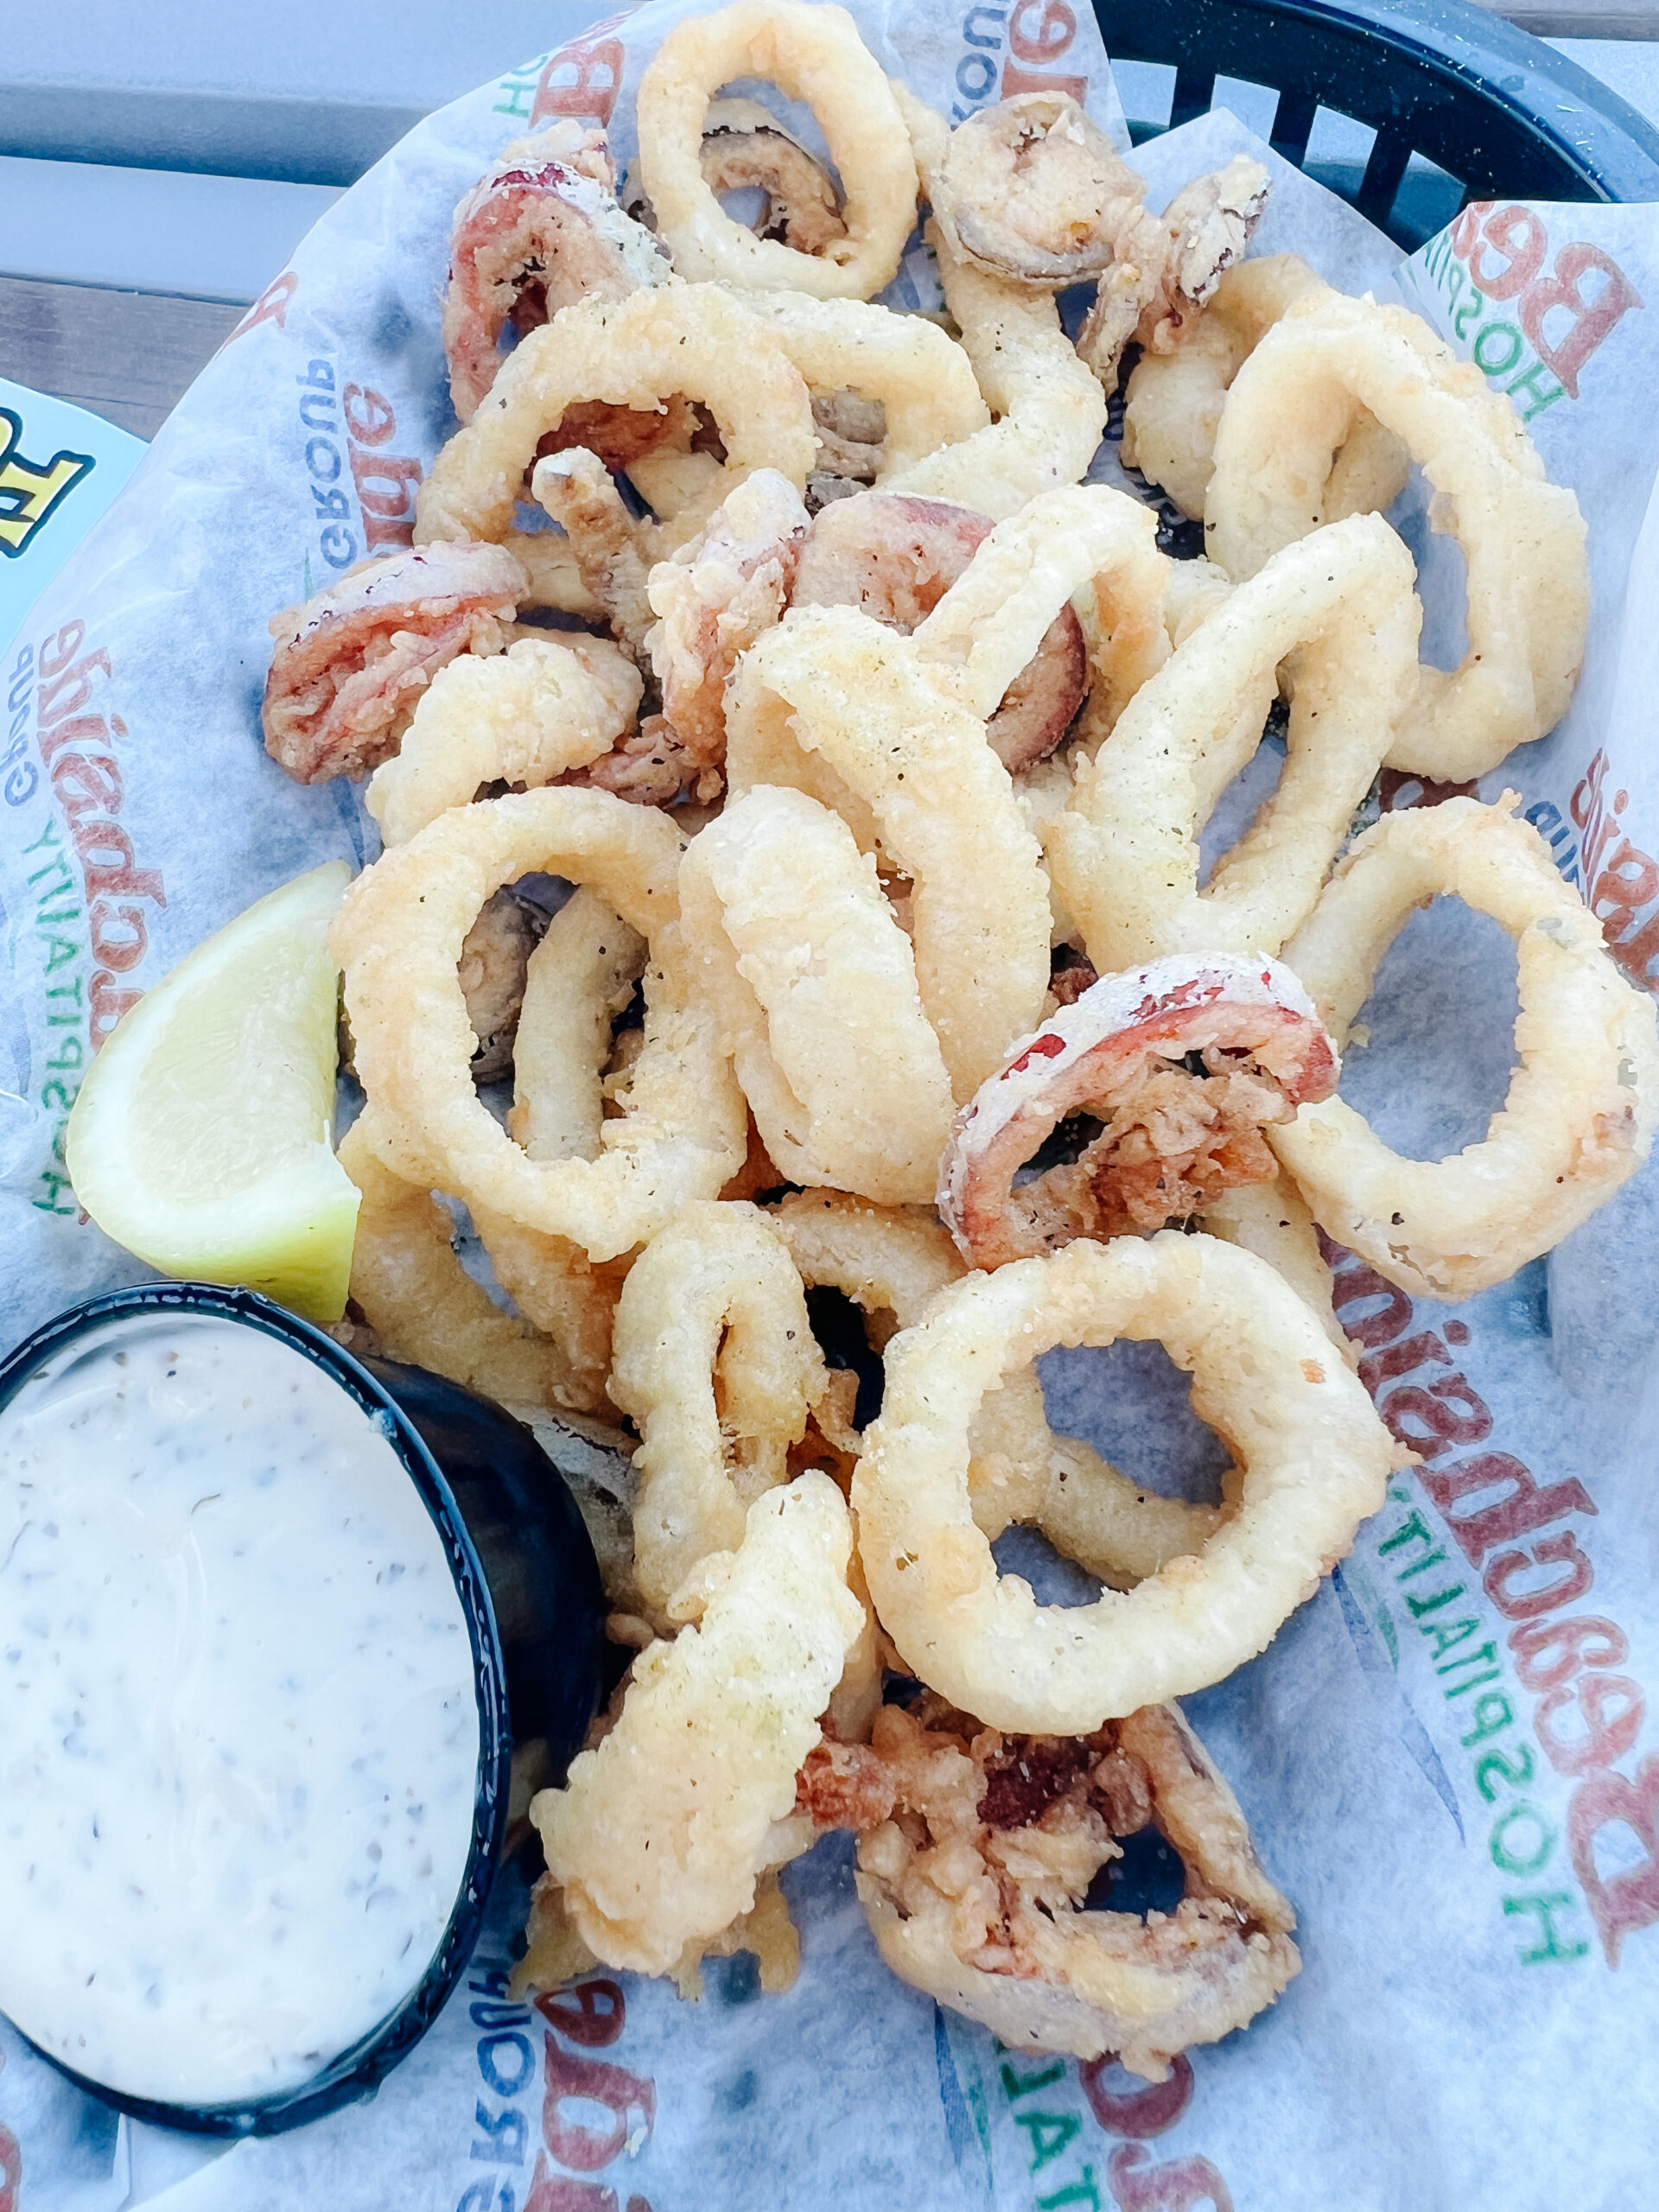 Fried calamari and peppers at Crabby's Beachside in Saint Augustine